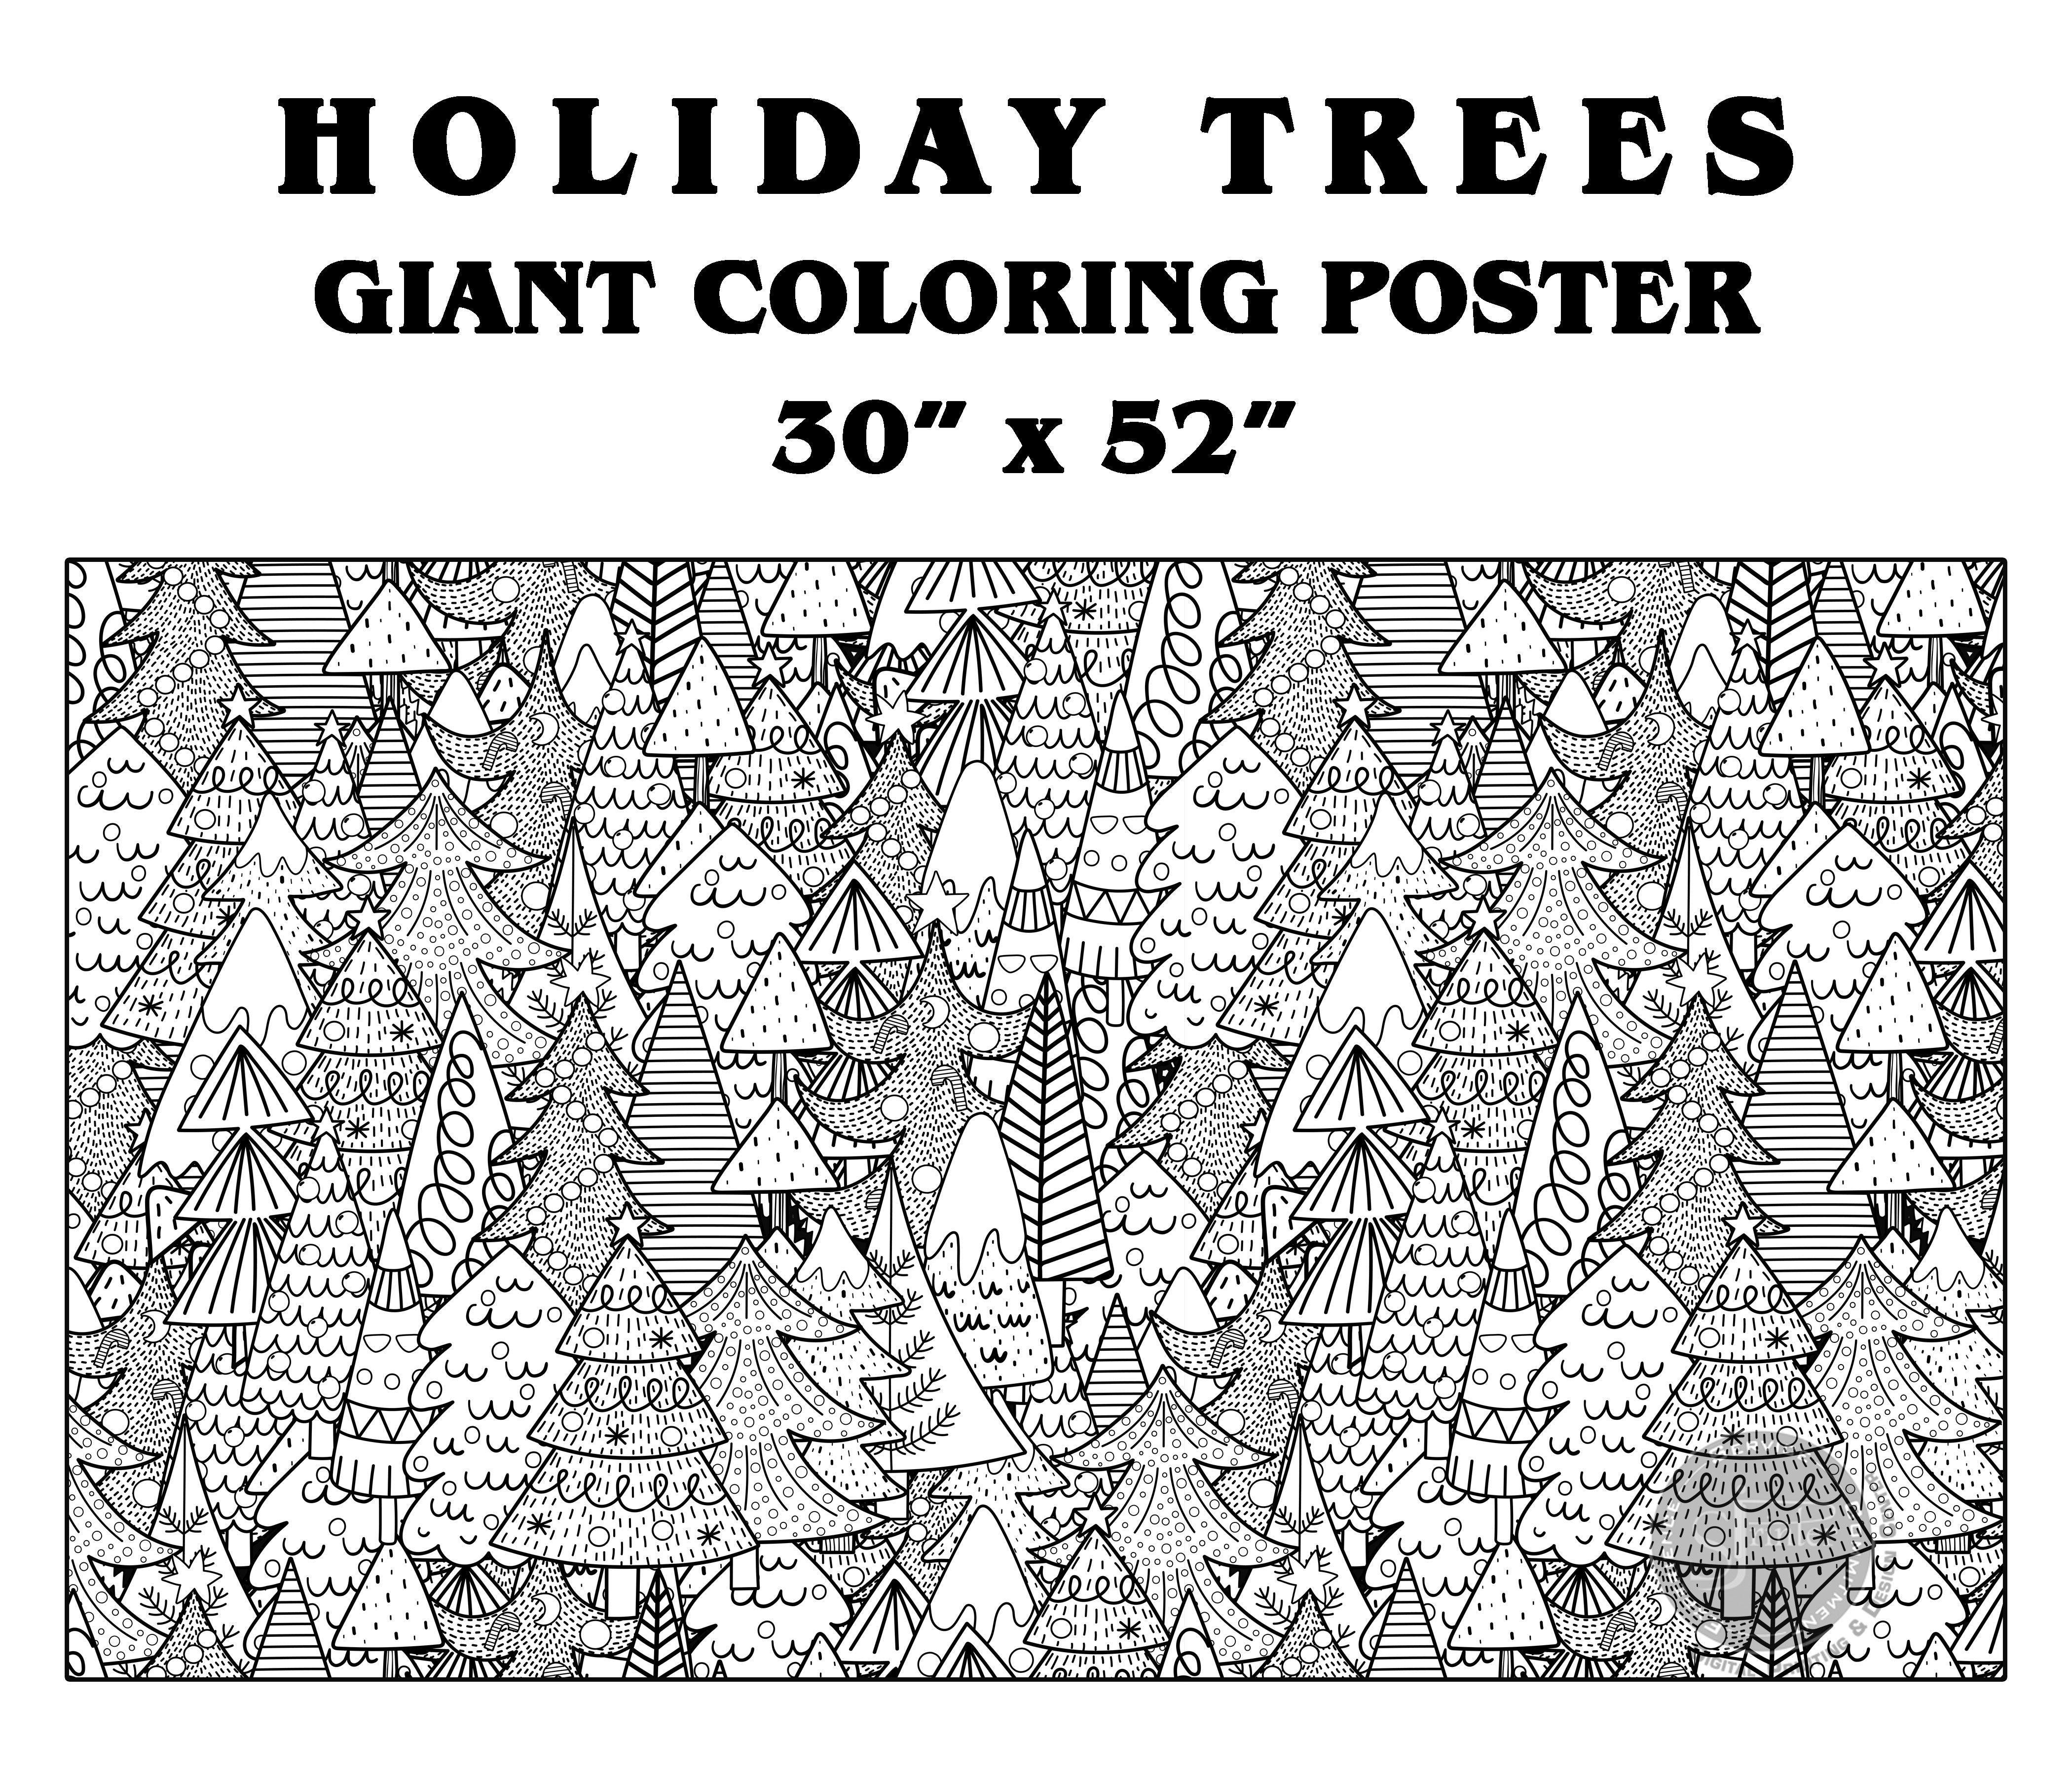 Get coloring posters for kids & adults at SJPrinter Store